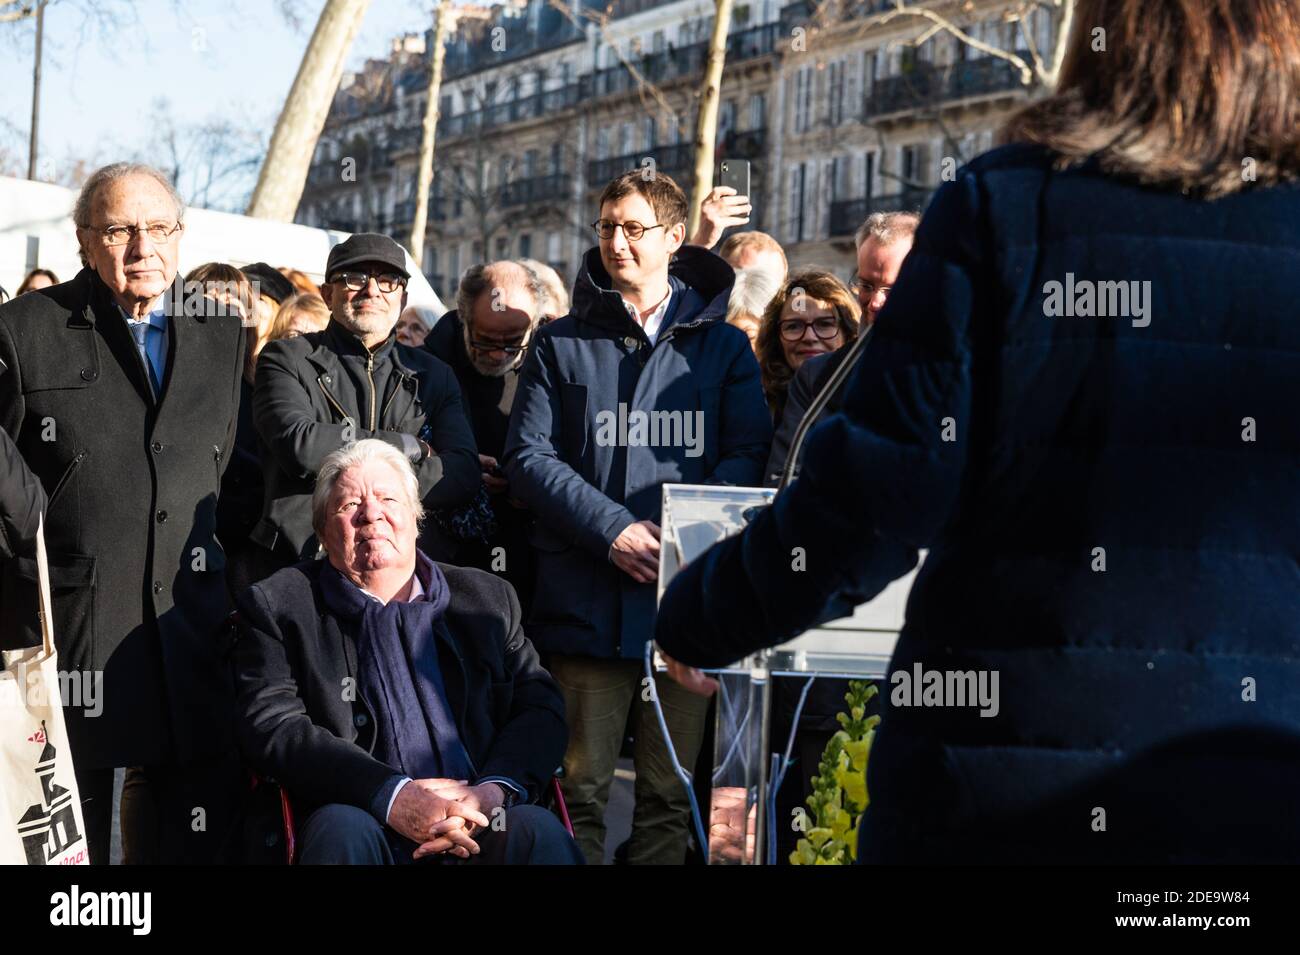 Jean-Jacques Sempe(sitting), artist, as Anne Hidalgo (R.), Mayor of Paris, unveils a wall fresco from one of his artwork in presence of Jacques Aidenbaum (L.), Mayor of the 3rd District, Jean Jacques Decaux, chairman of JC Decaux, François Morel actor and director and Jean Marie Havan artist who painted the wall, at the crossing of Boulevard des Filles du Calvaire and Rue Froissard, 3rd District of Paris, France, Febuary 16th, 2019. Photo by Daniel Derajinski/ABACAPRESS.COM Stock Photo